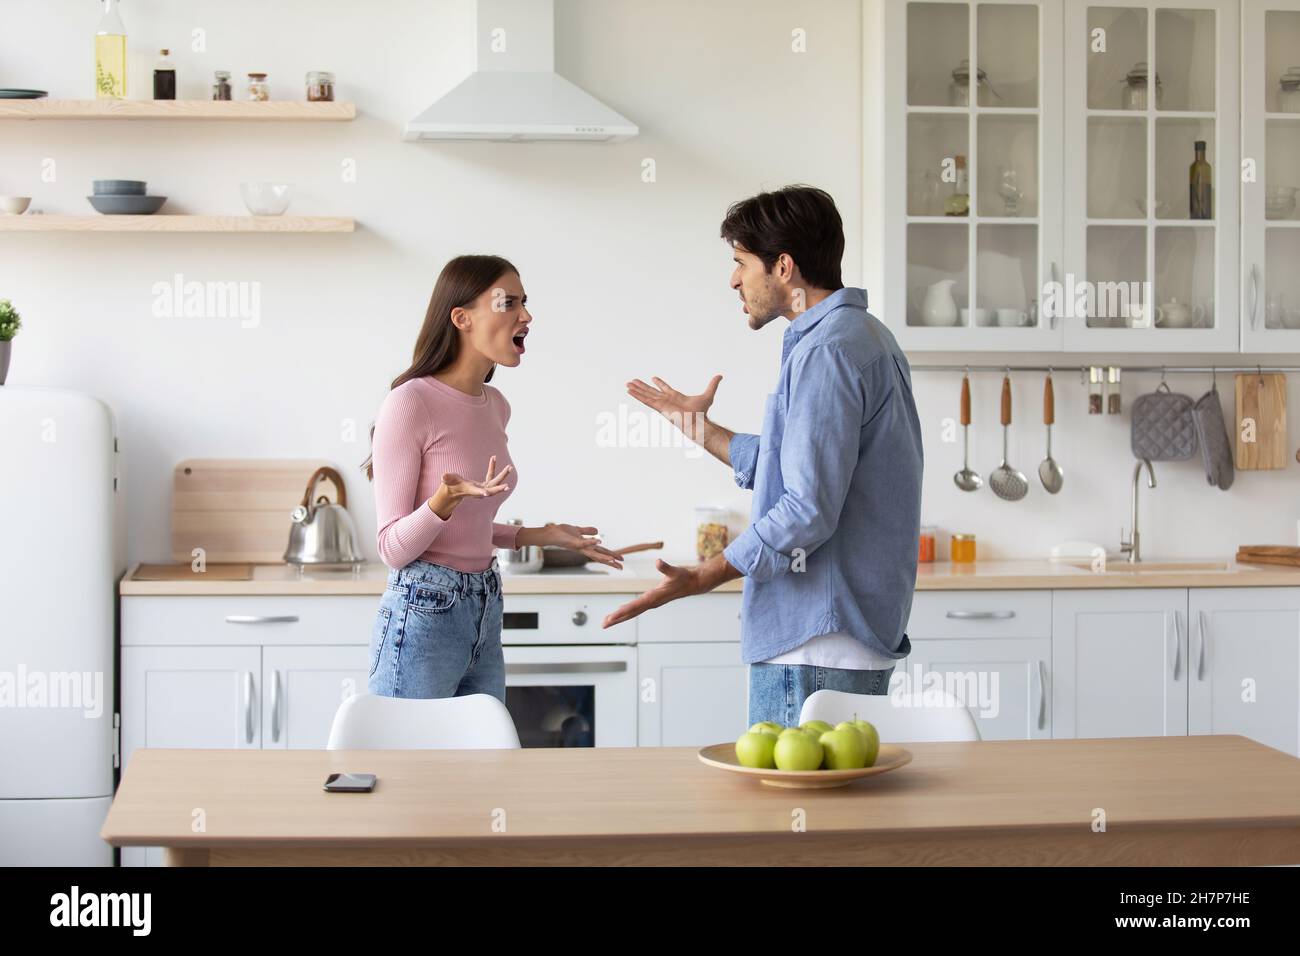 Angry excited caucasian millennial husband and wife quarreling, yelling at each other and gesturing in kitchen Stock Photo